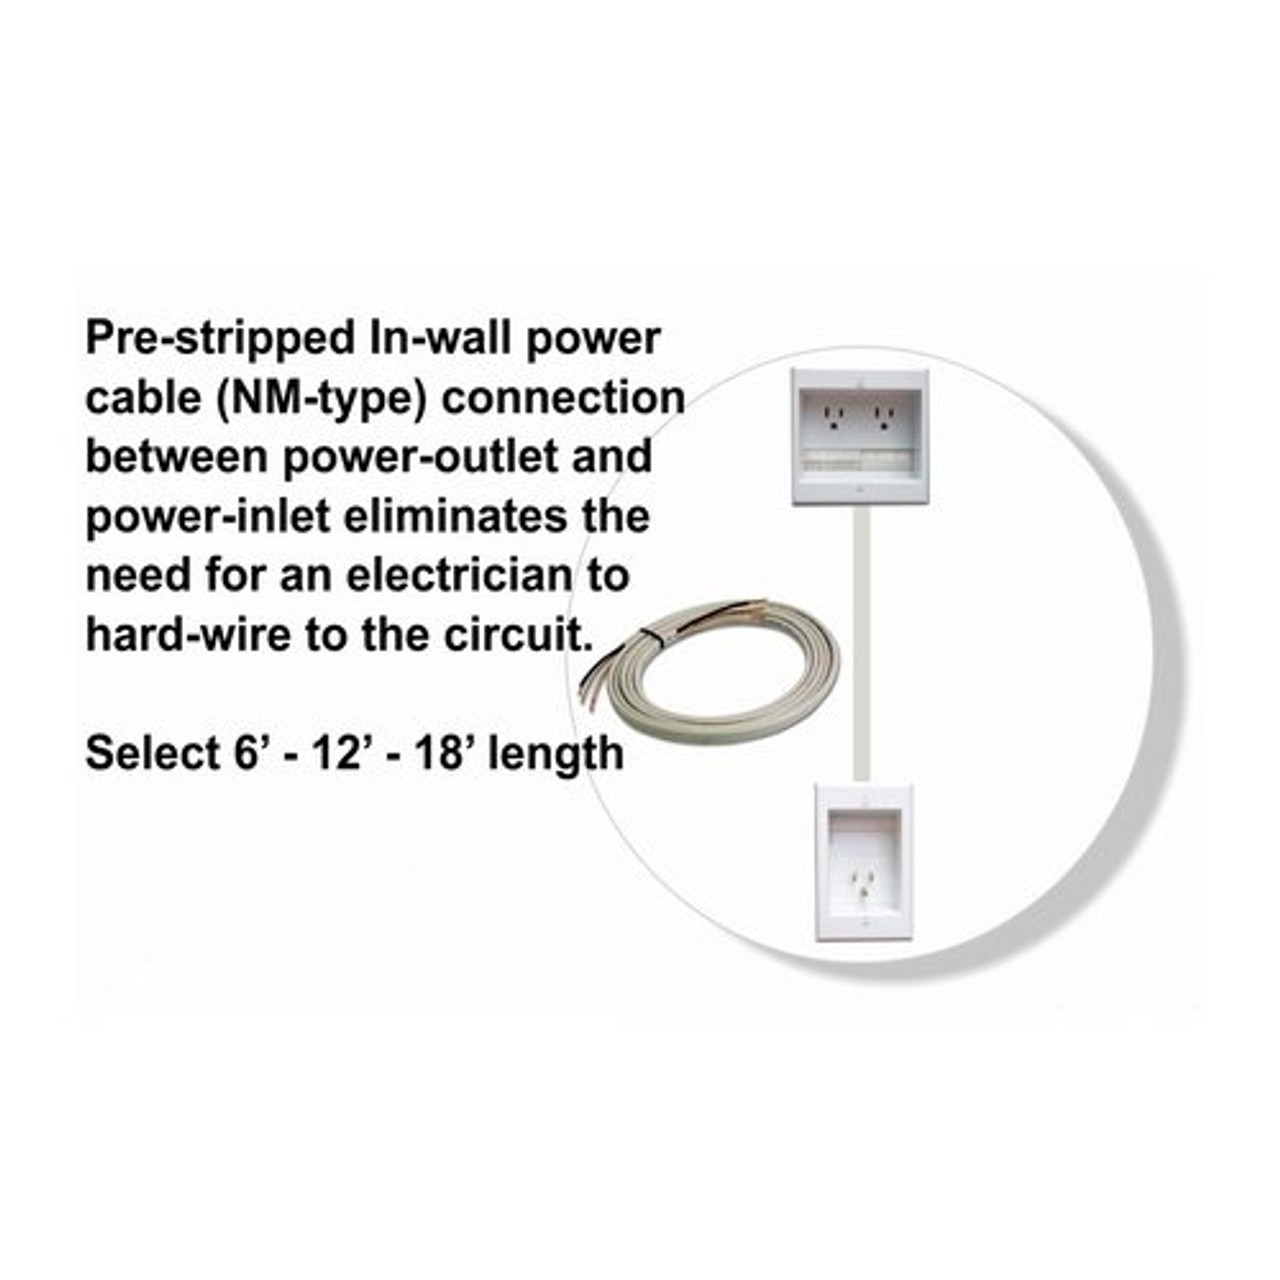 https://cdn11.bigcommerce.com/s-bd95c/images/stencil/1280x1280/products/2771/4312/PowerBridge_Solutions_TWO_PRO_Cable_Management_System_with_Dual_Power_for_Wall_Mounted_TVs_pre_stripped_wire__04684.1393640022.jpg?c=2?imbypass=on